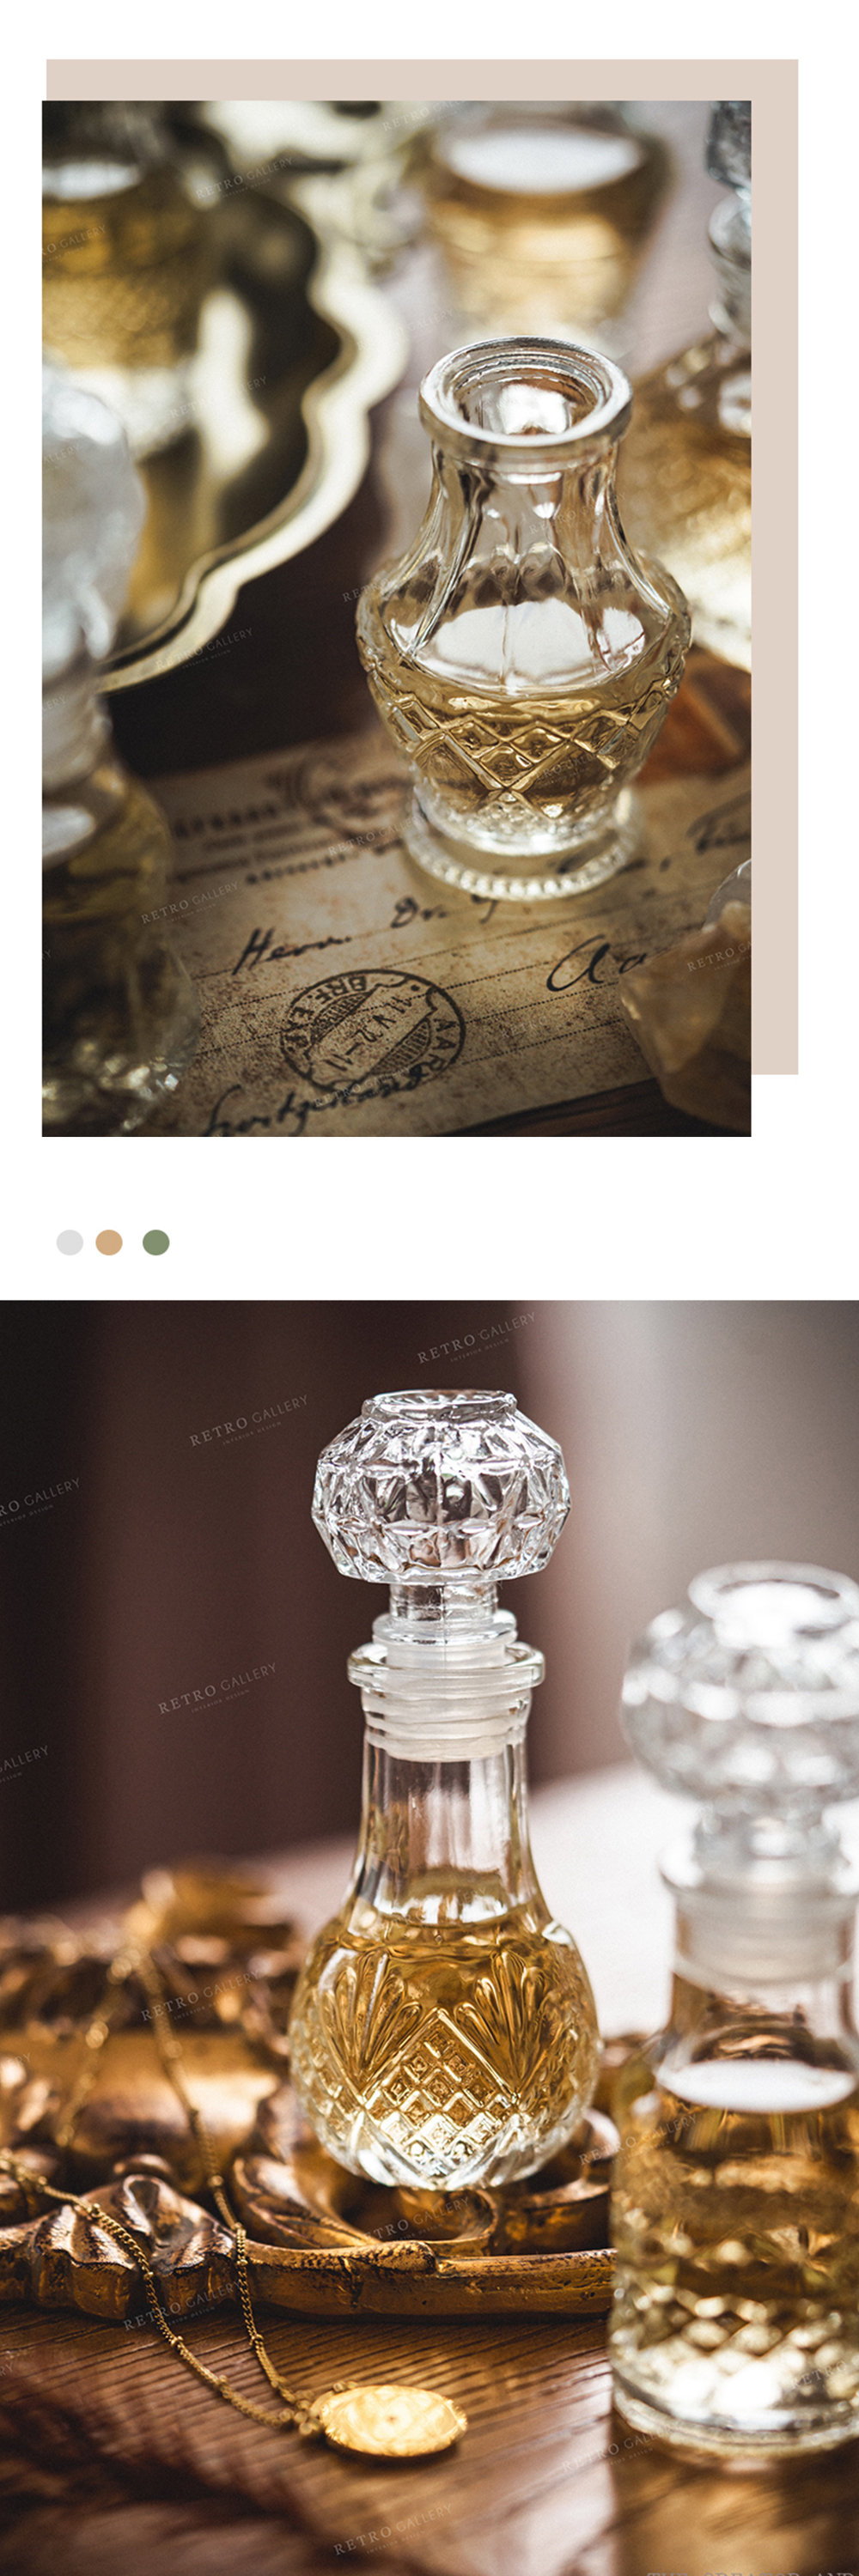 Vintage Inspired Perfume Bottle from Apollo Box